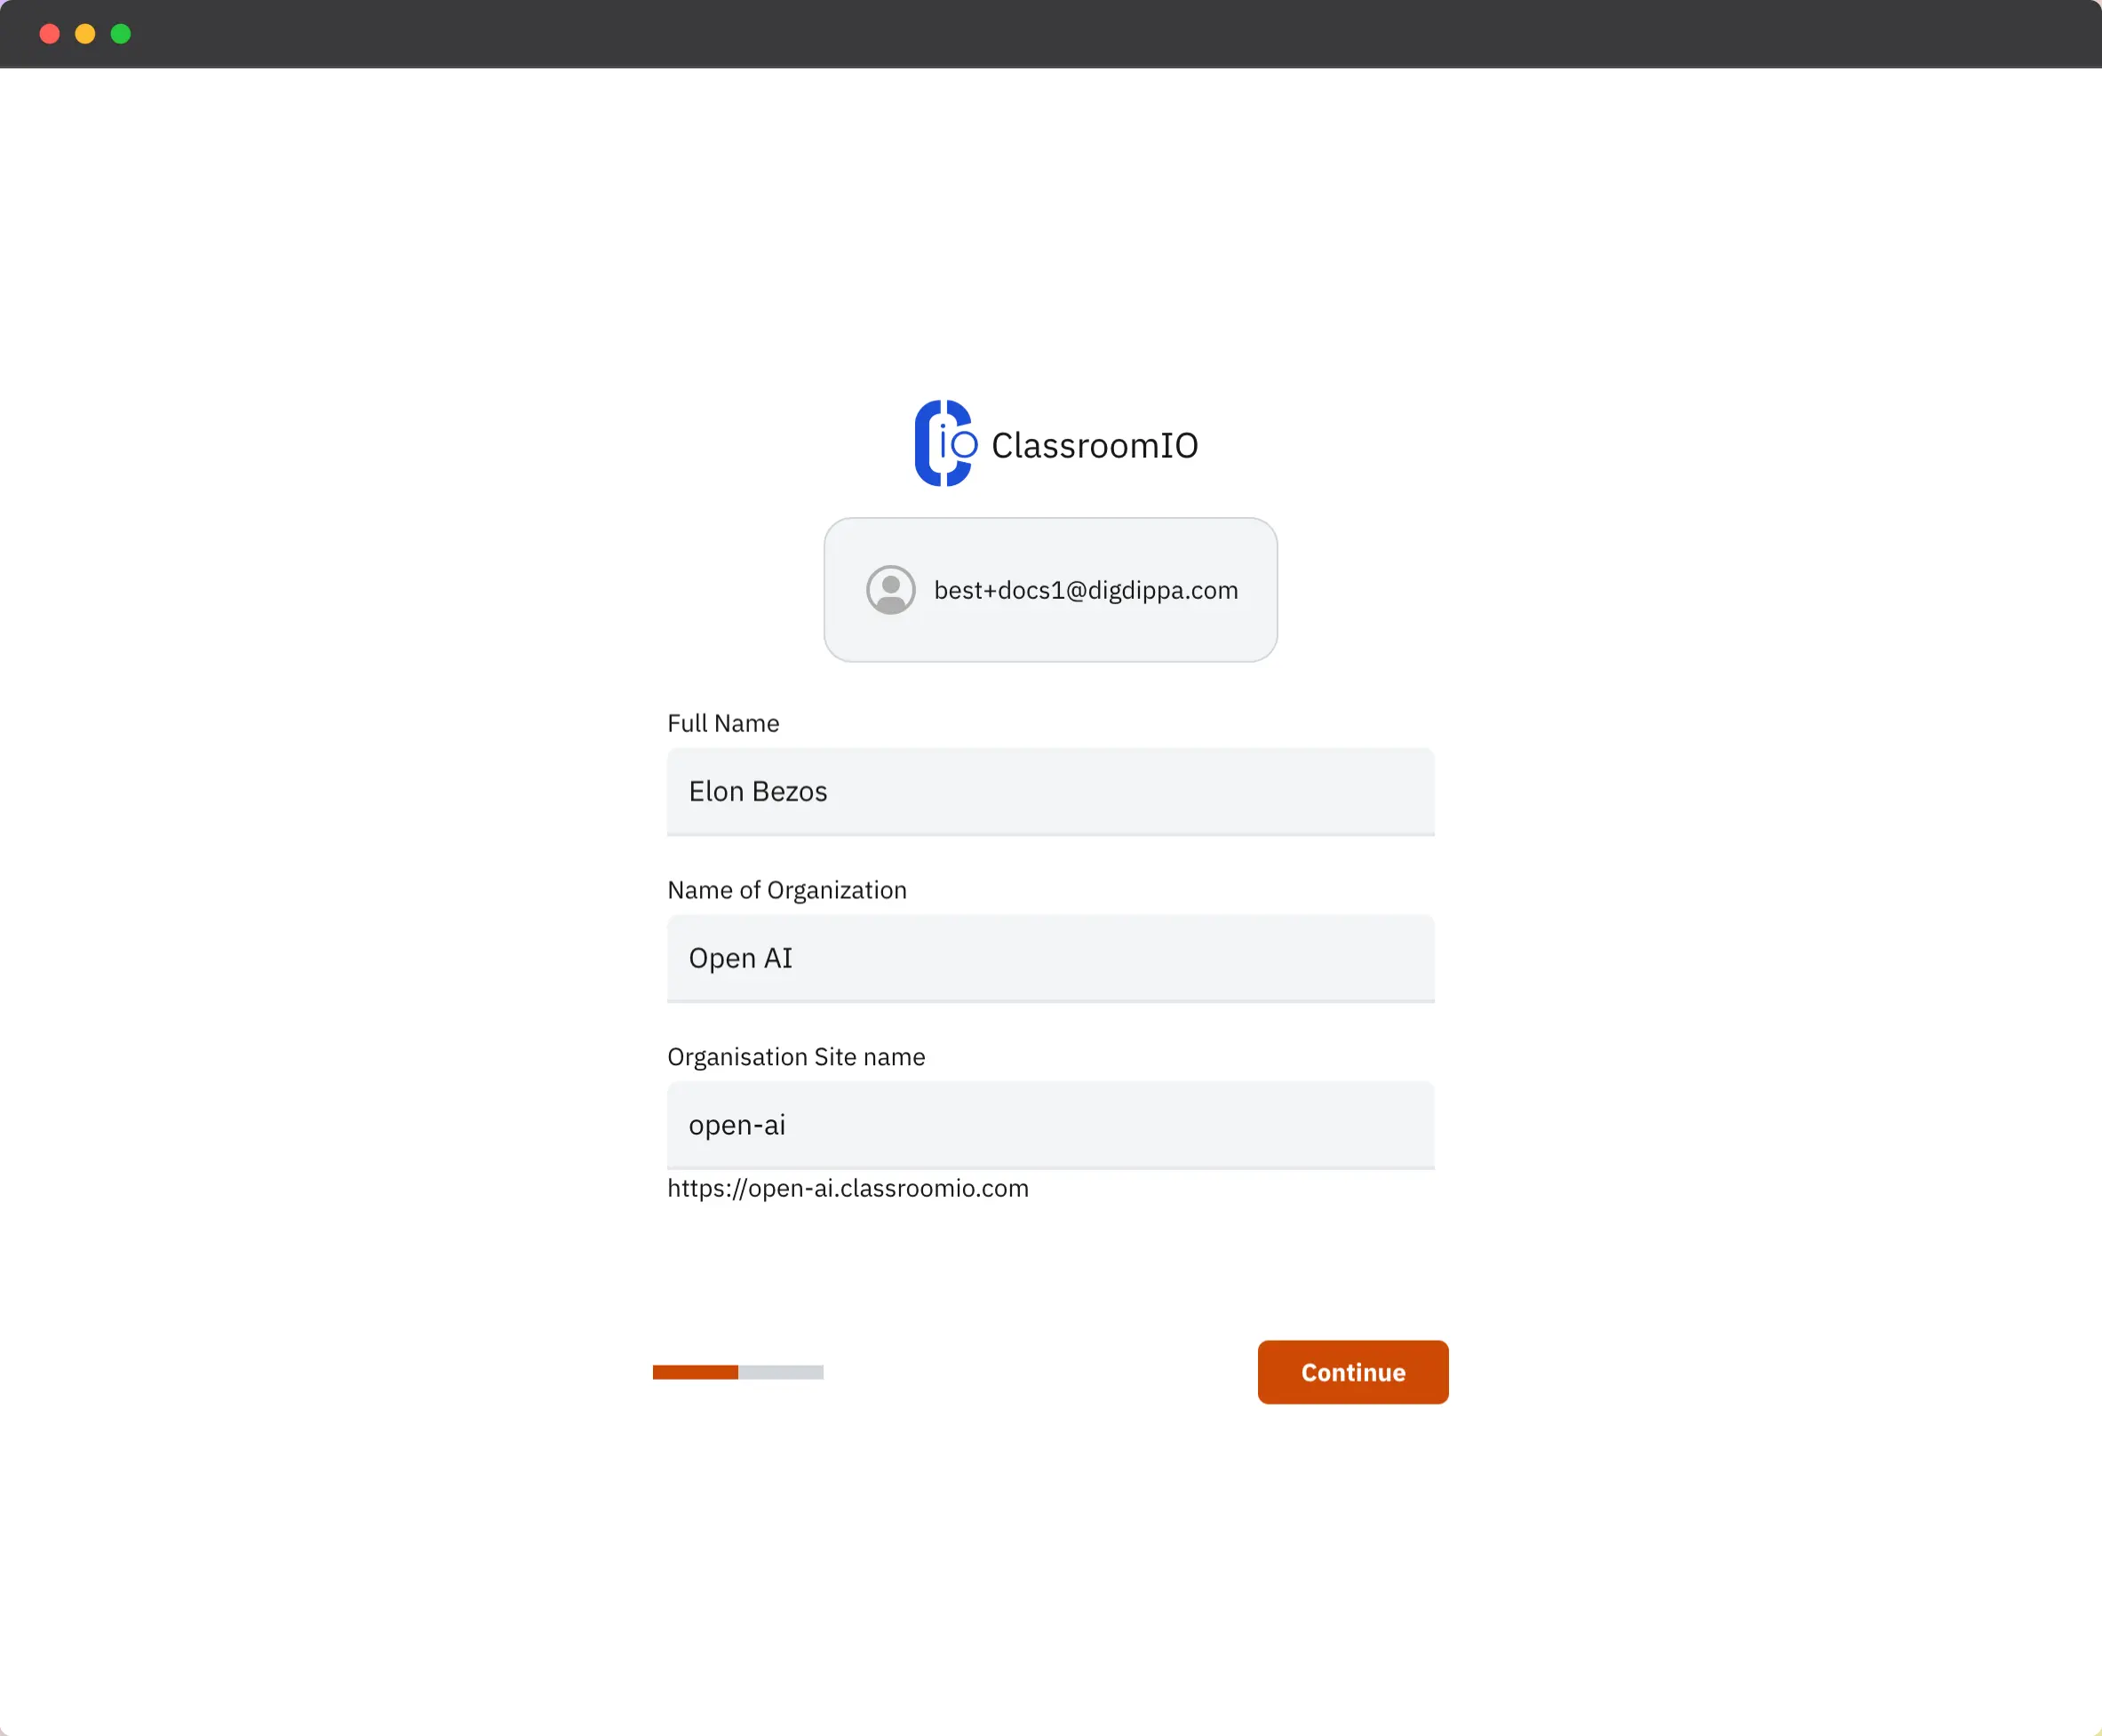 ClassroomIO onboarding page with a form containing inputs for Full Name, Name of Organization, and, Organization Site Name. At the bottom, there is a Continue button.